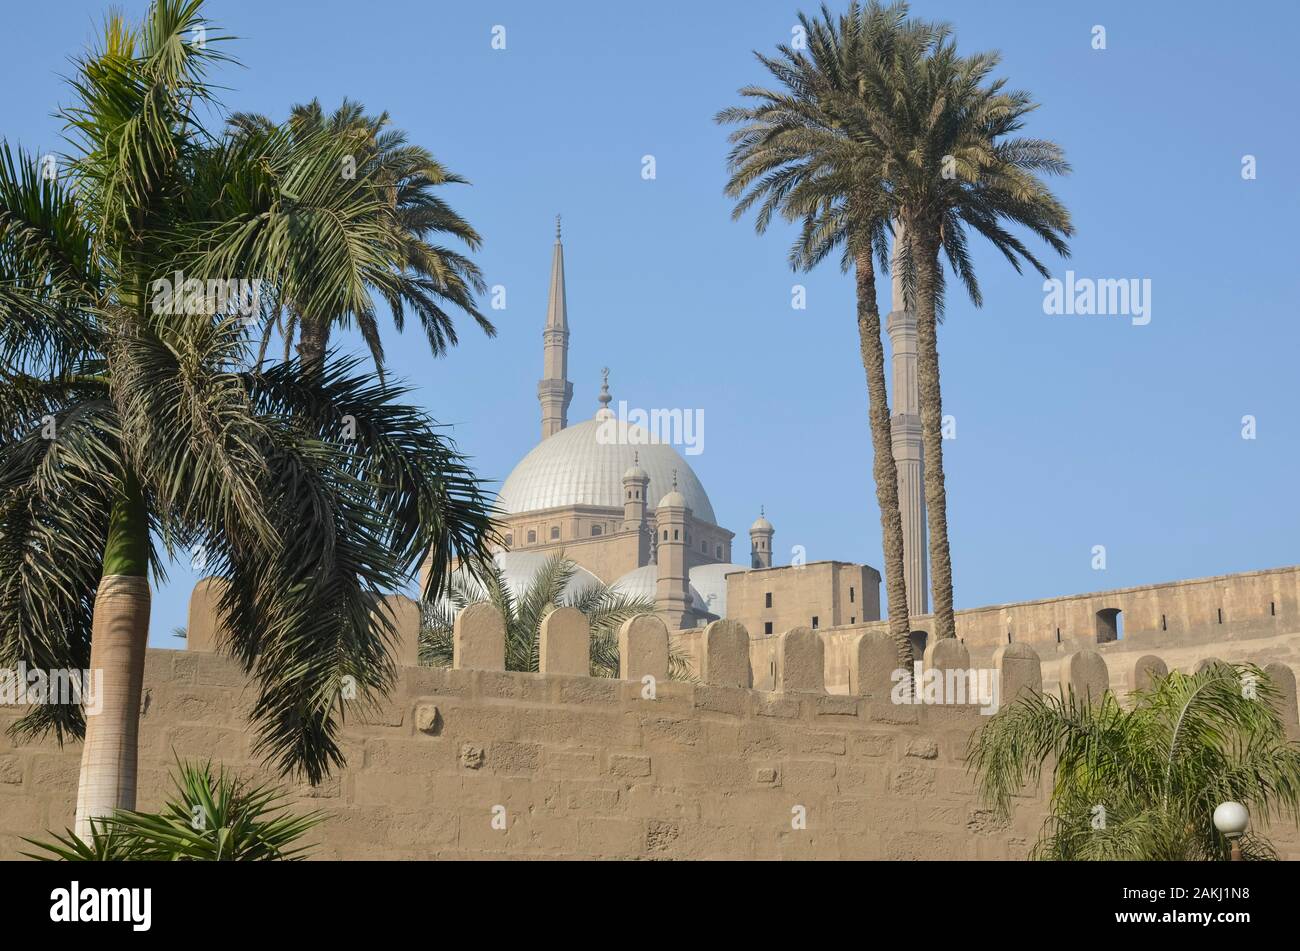 Saladin Citadel of Cairo, a fortified medieval castle with a mosque and a museum. Egypt Stock Photo